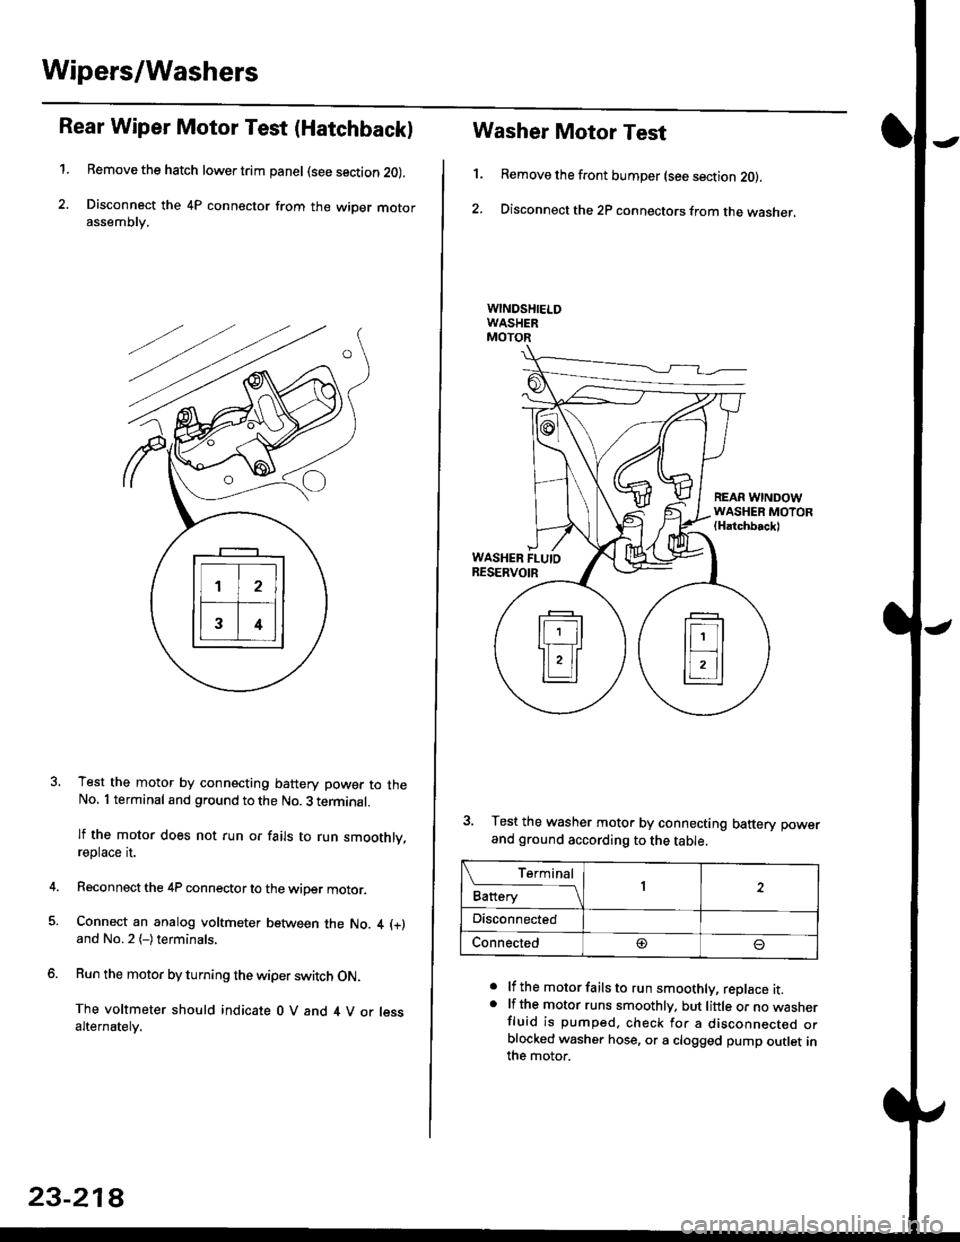 HONDA CIVIC 1997 6.G Owners Manual Wipers/Washers
Rear Wiper Motor Test (Hatchback)
1.Remove the hatch lower trim panel (see section 20).
Disconnect the 4P connector from the wiper motorassemDry,
Test the motor by connecting battery po